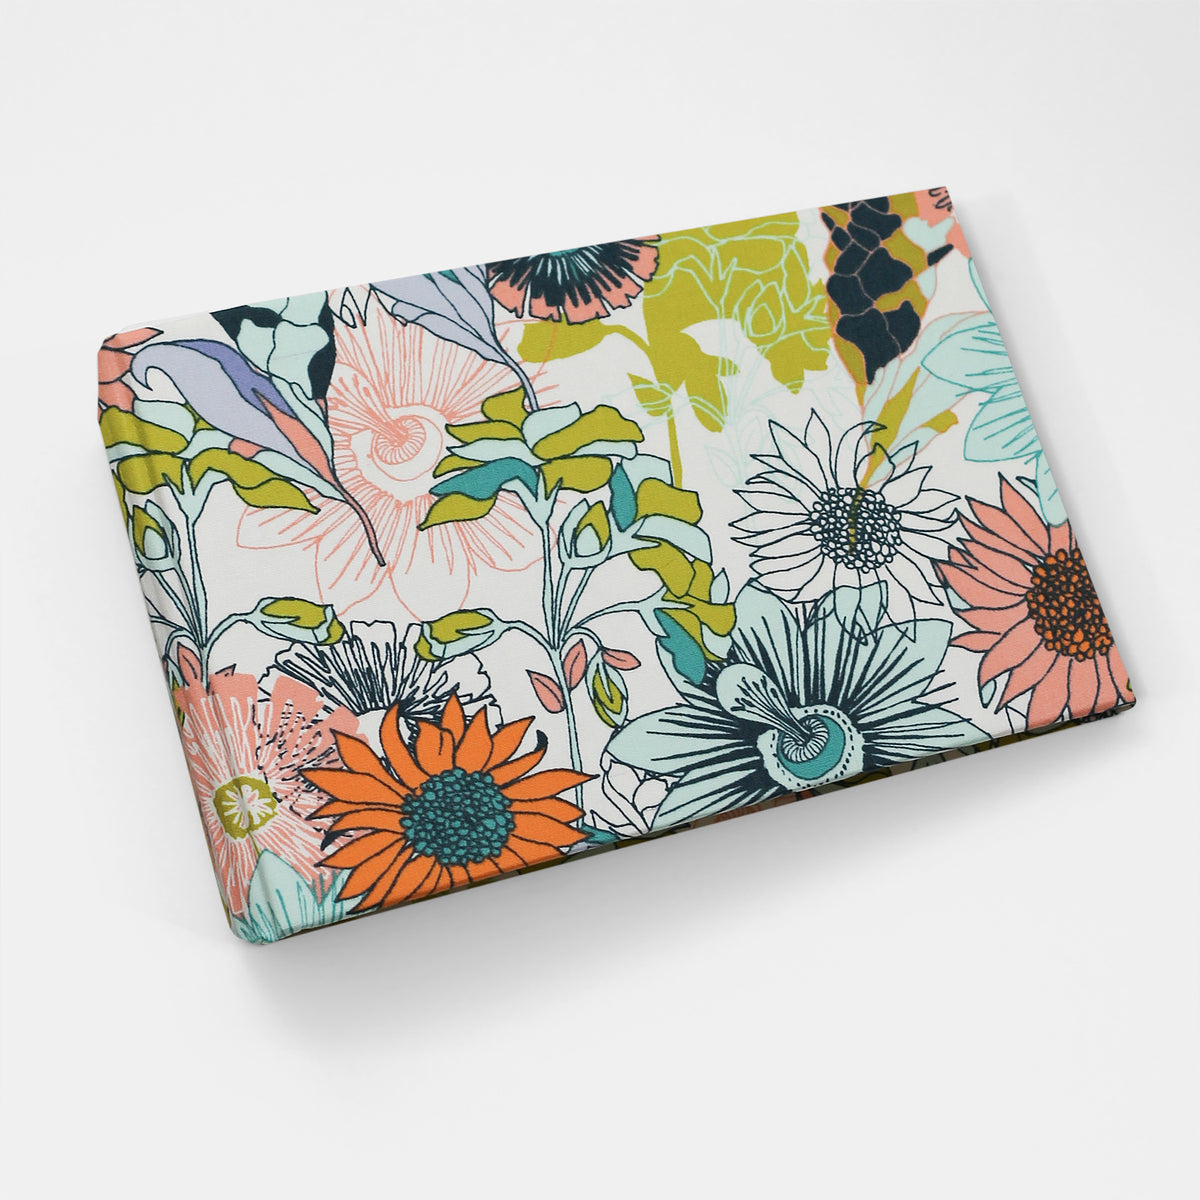 Small Photo Binder | for 4x6 Photos | with Retro Floral Fabric Cover